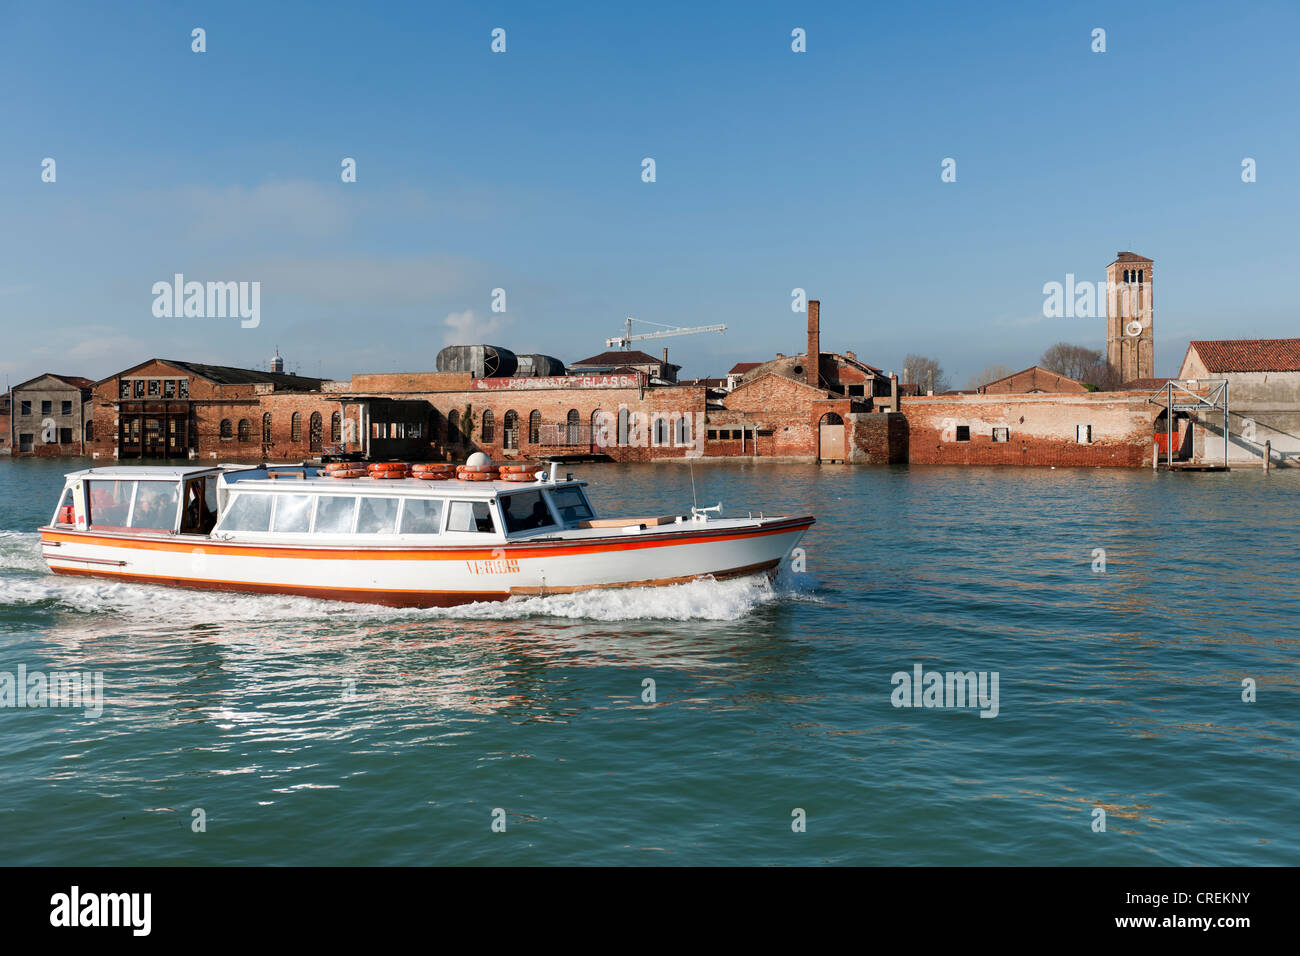 Workshops of the famous glass art on the lagoon island of Murano, a vaporetto in the foreground, Venice, Veneto, Italy Stock Photo